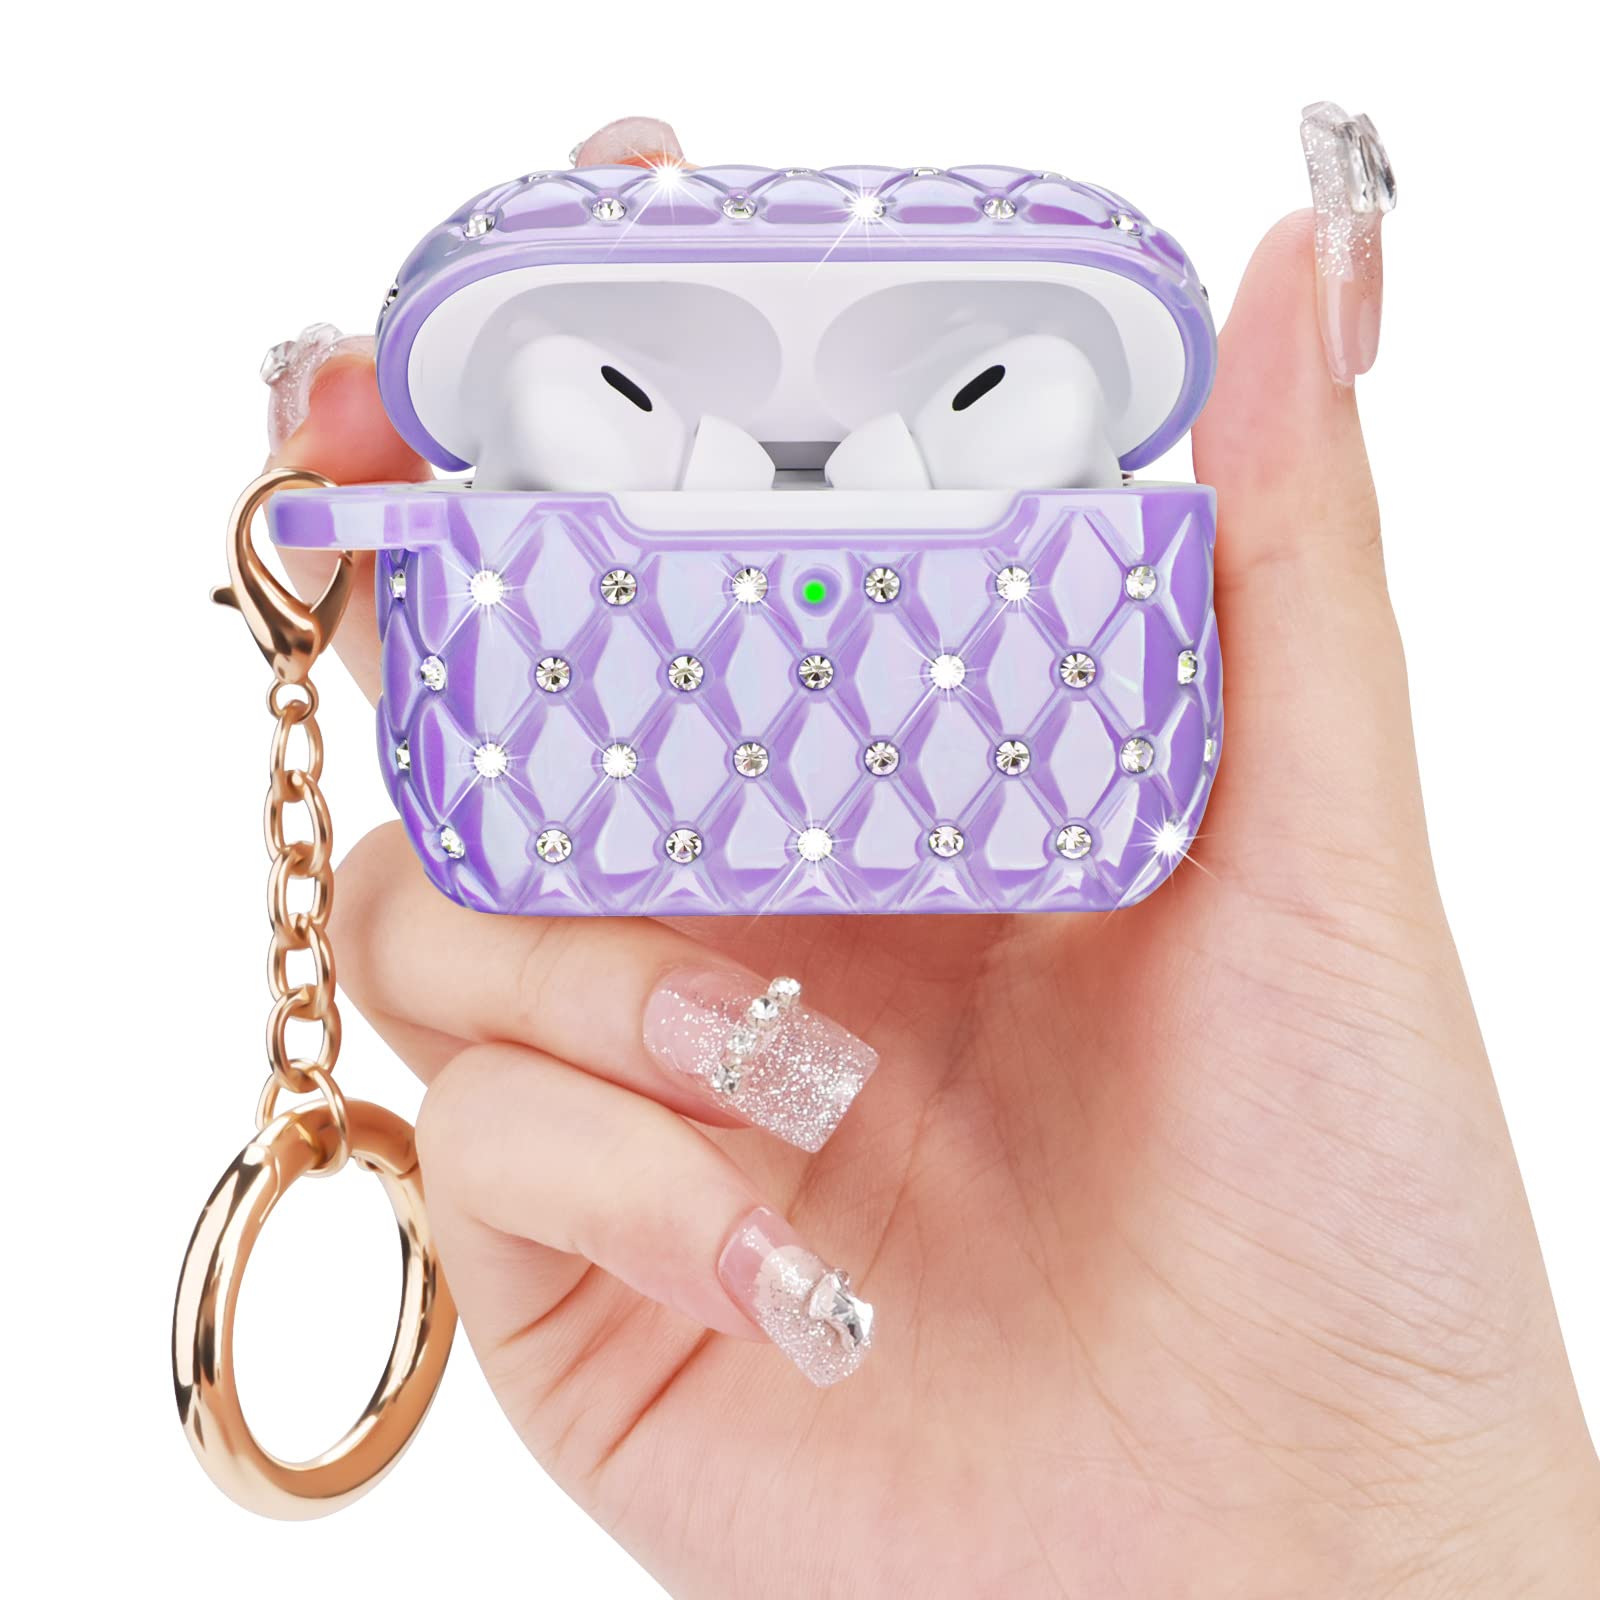 VISOOM Airpods Pro 2nd Generation Case - Bling Rhinestone Hard Protective Case Cover with Lanyard for Apple Airpod Gen Pro 2